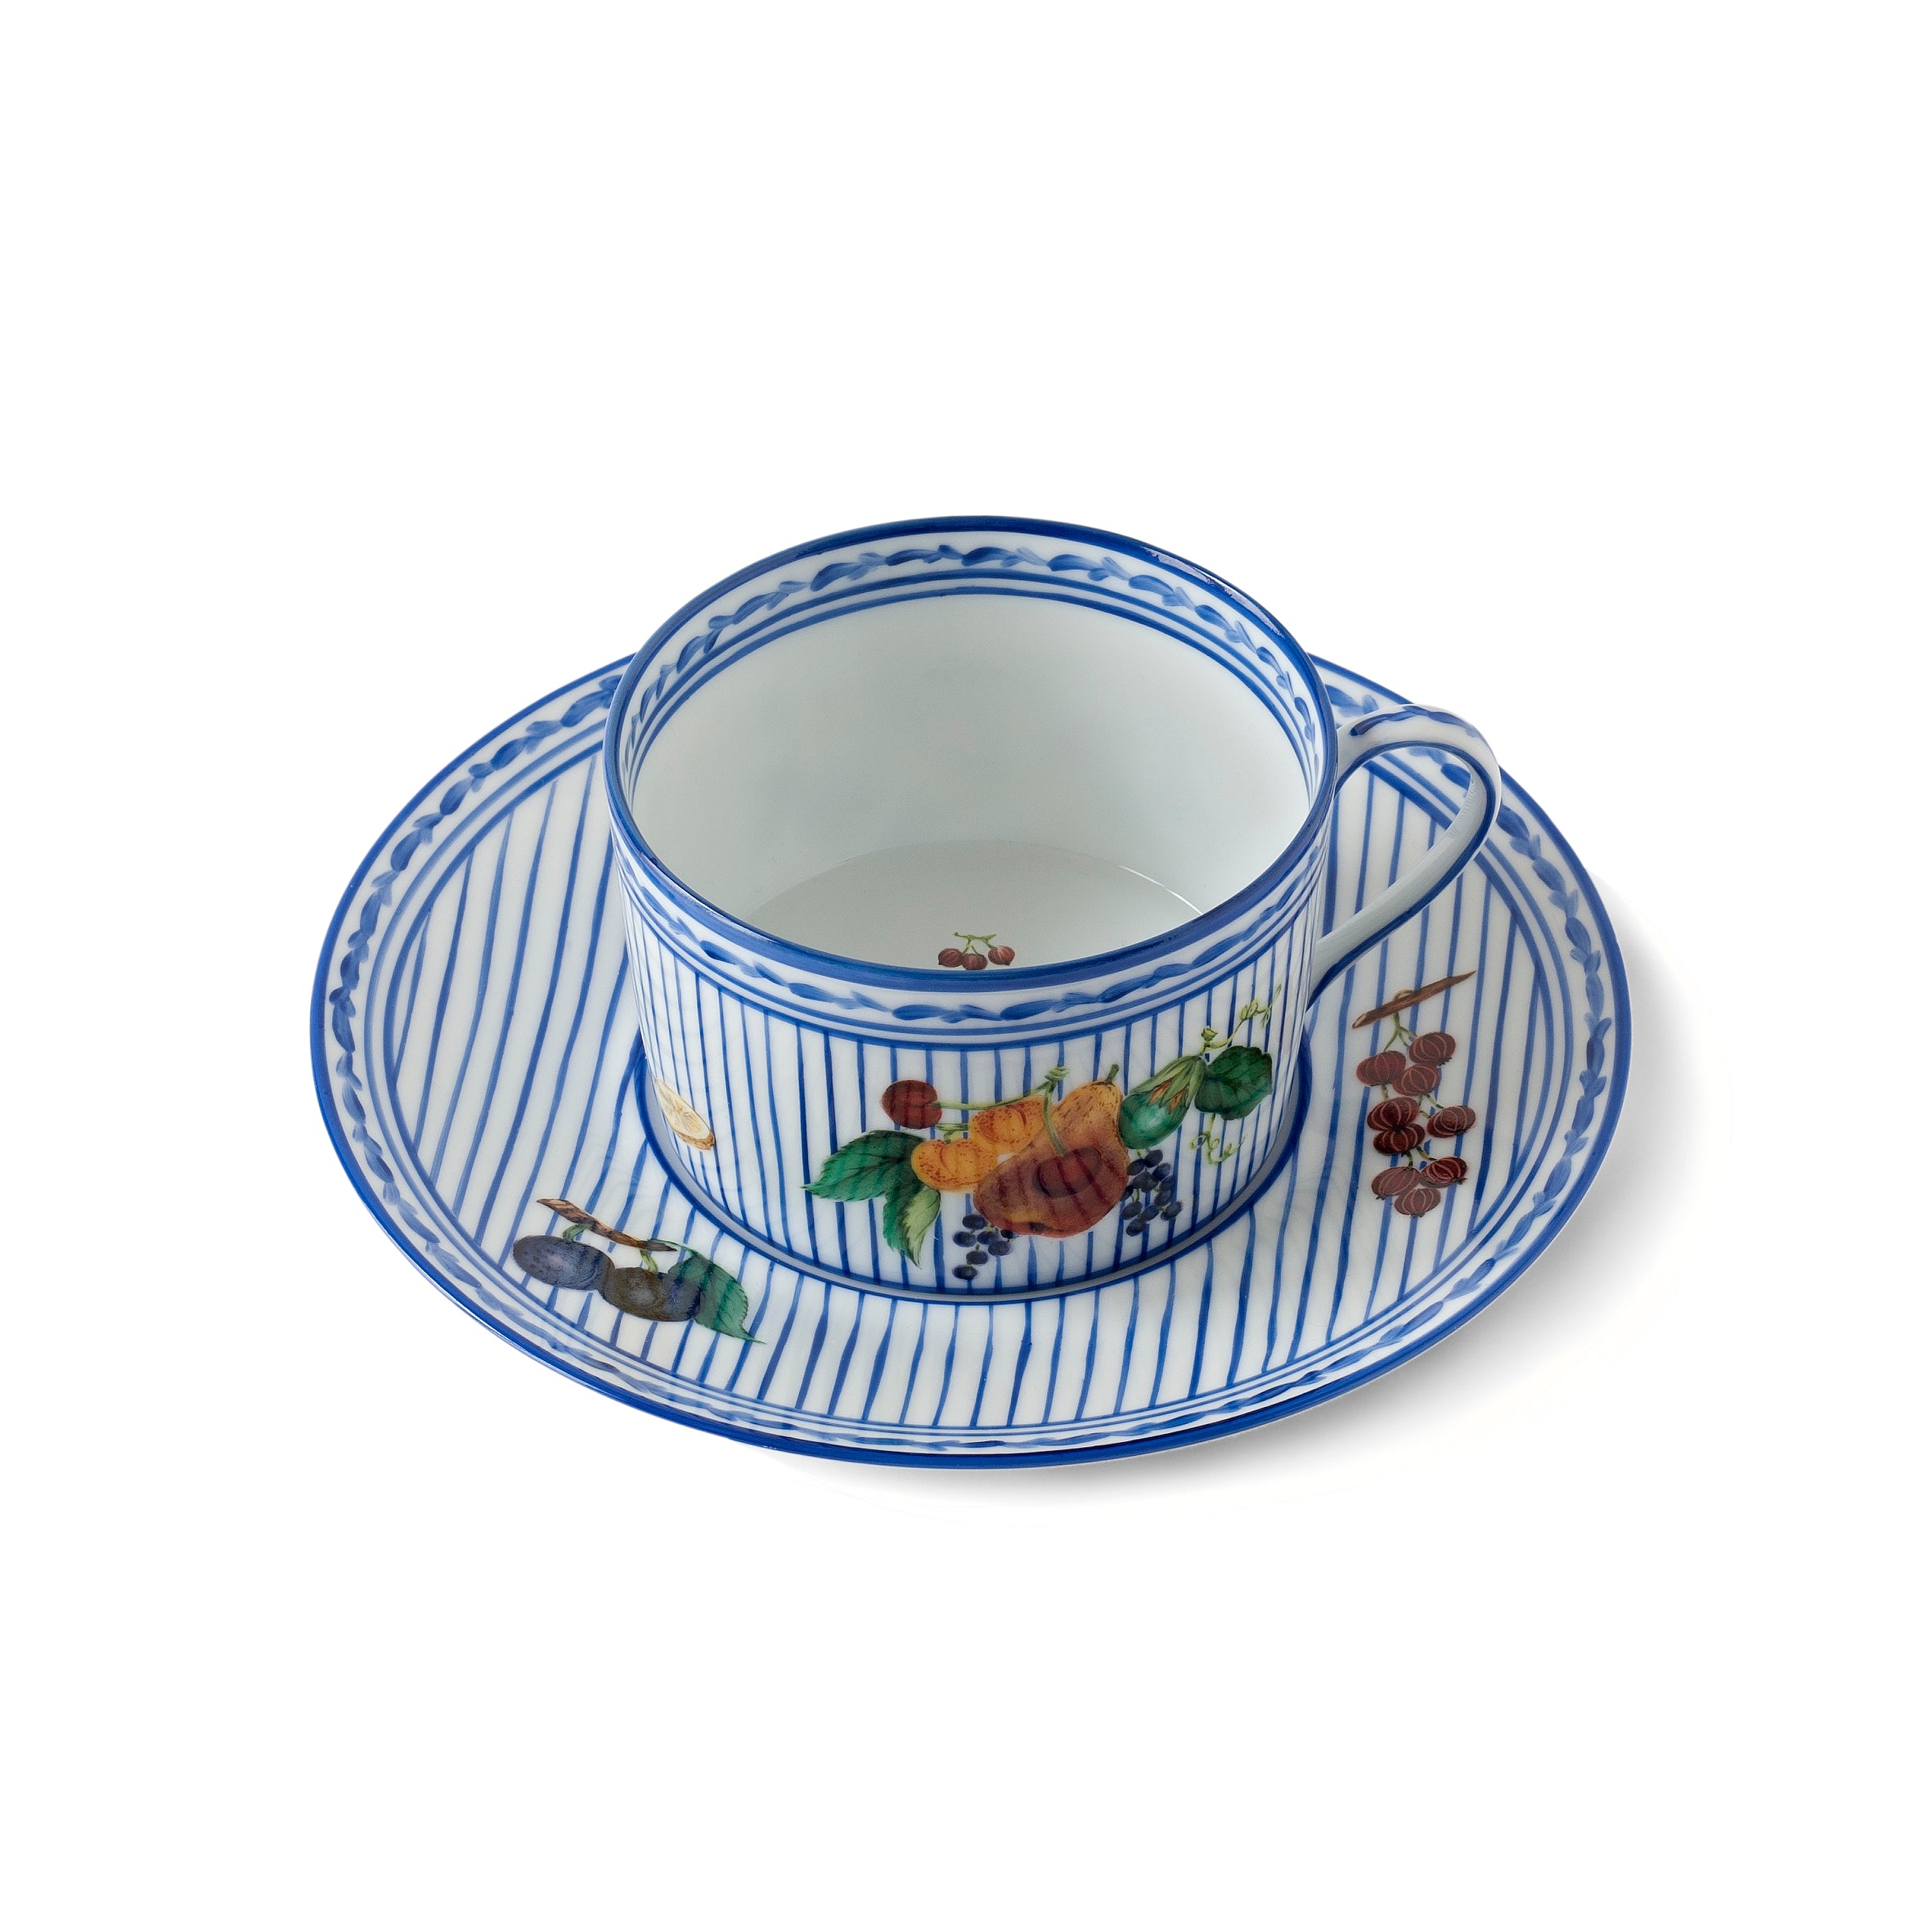 Potager in Blue - Breakfast cup and saucer
